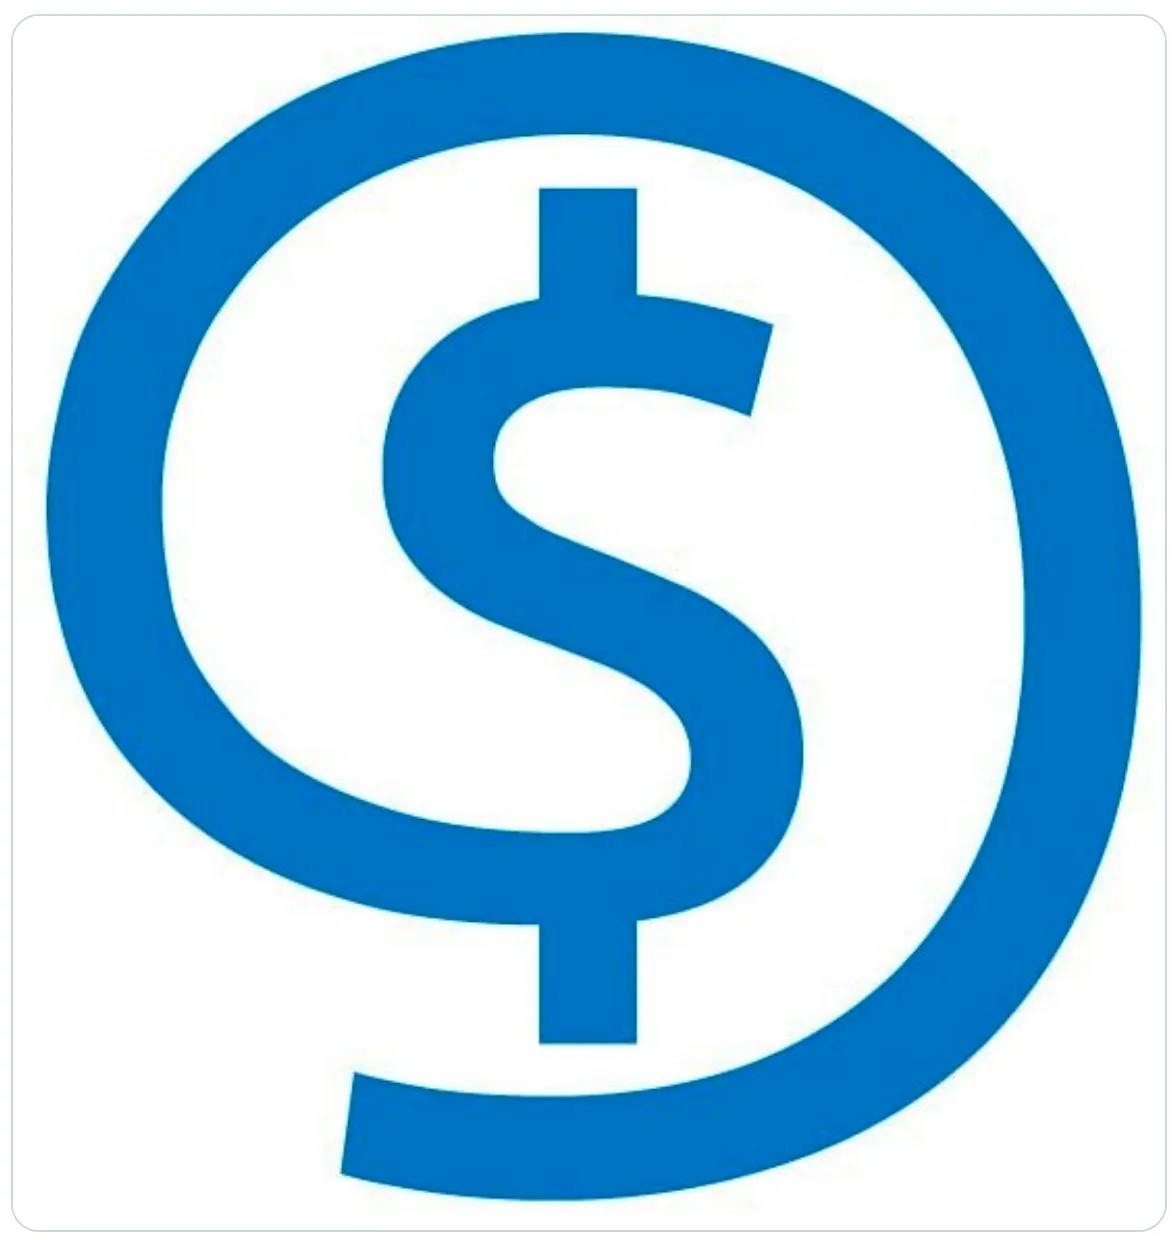 The bitcoin community is trying to design the “Satoshi symbol”